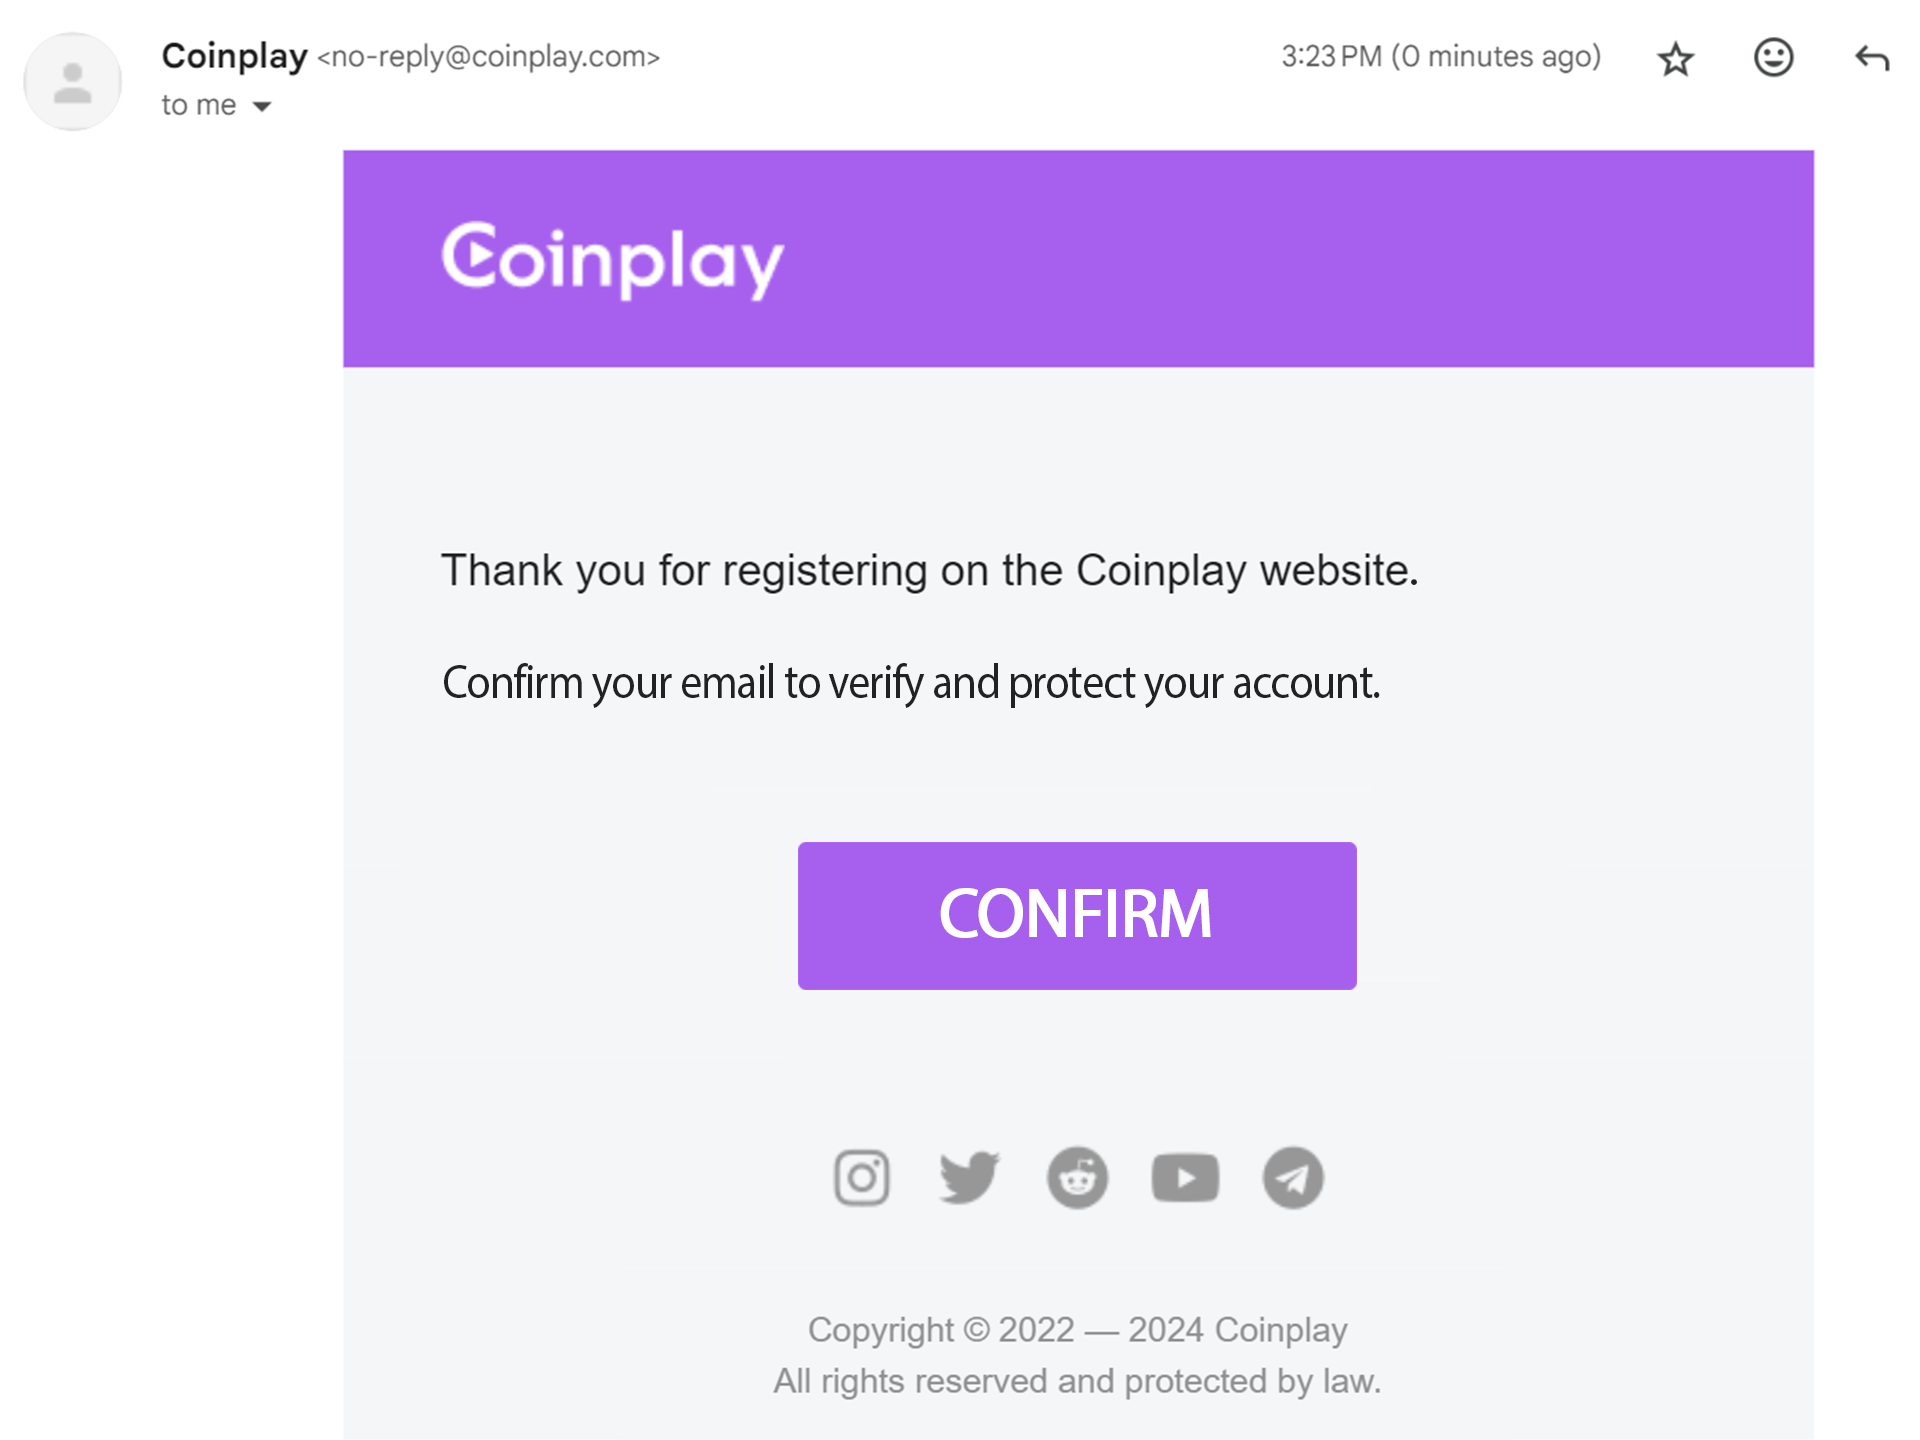 Follow the link from the email from Coinplay to confirm your registration.